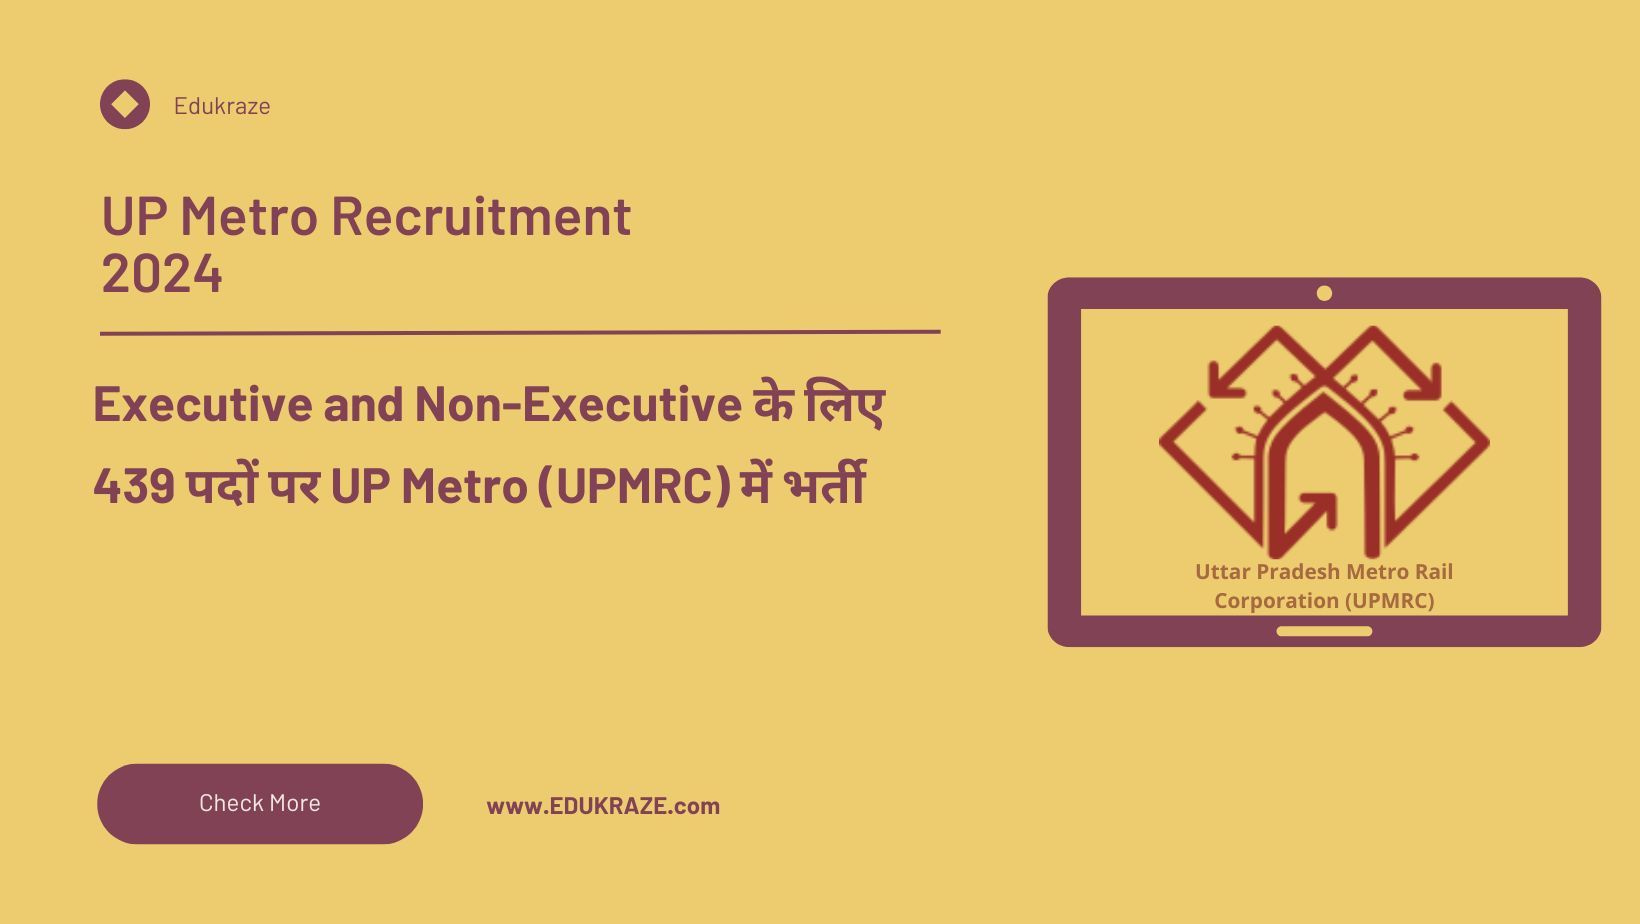 UP Metro Recruitment 2024: Check Eligibility and Official Notification